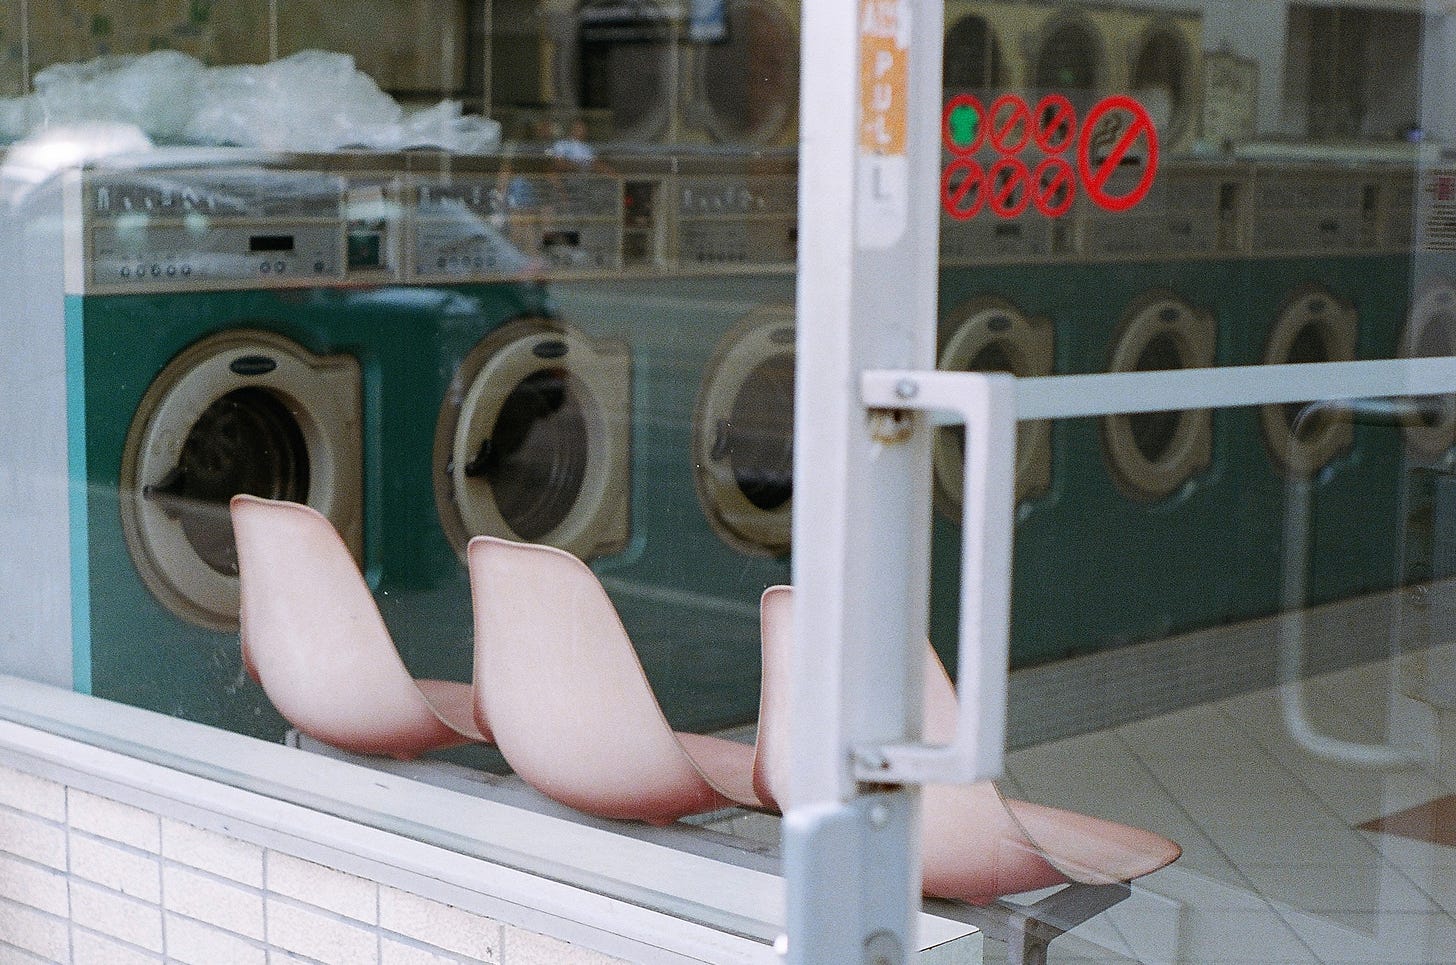 pale pink chairs in laundromat with teal washing machines